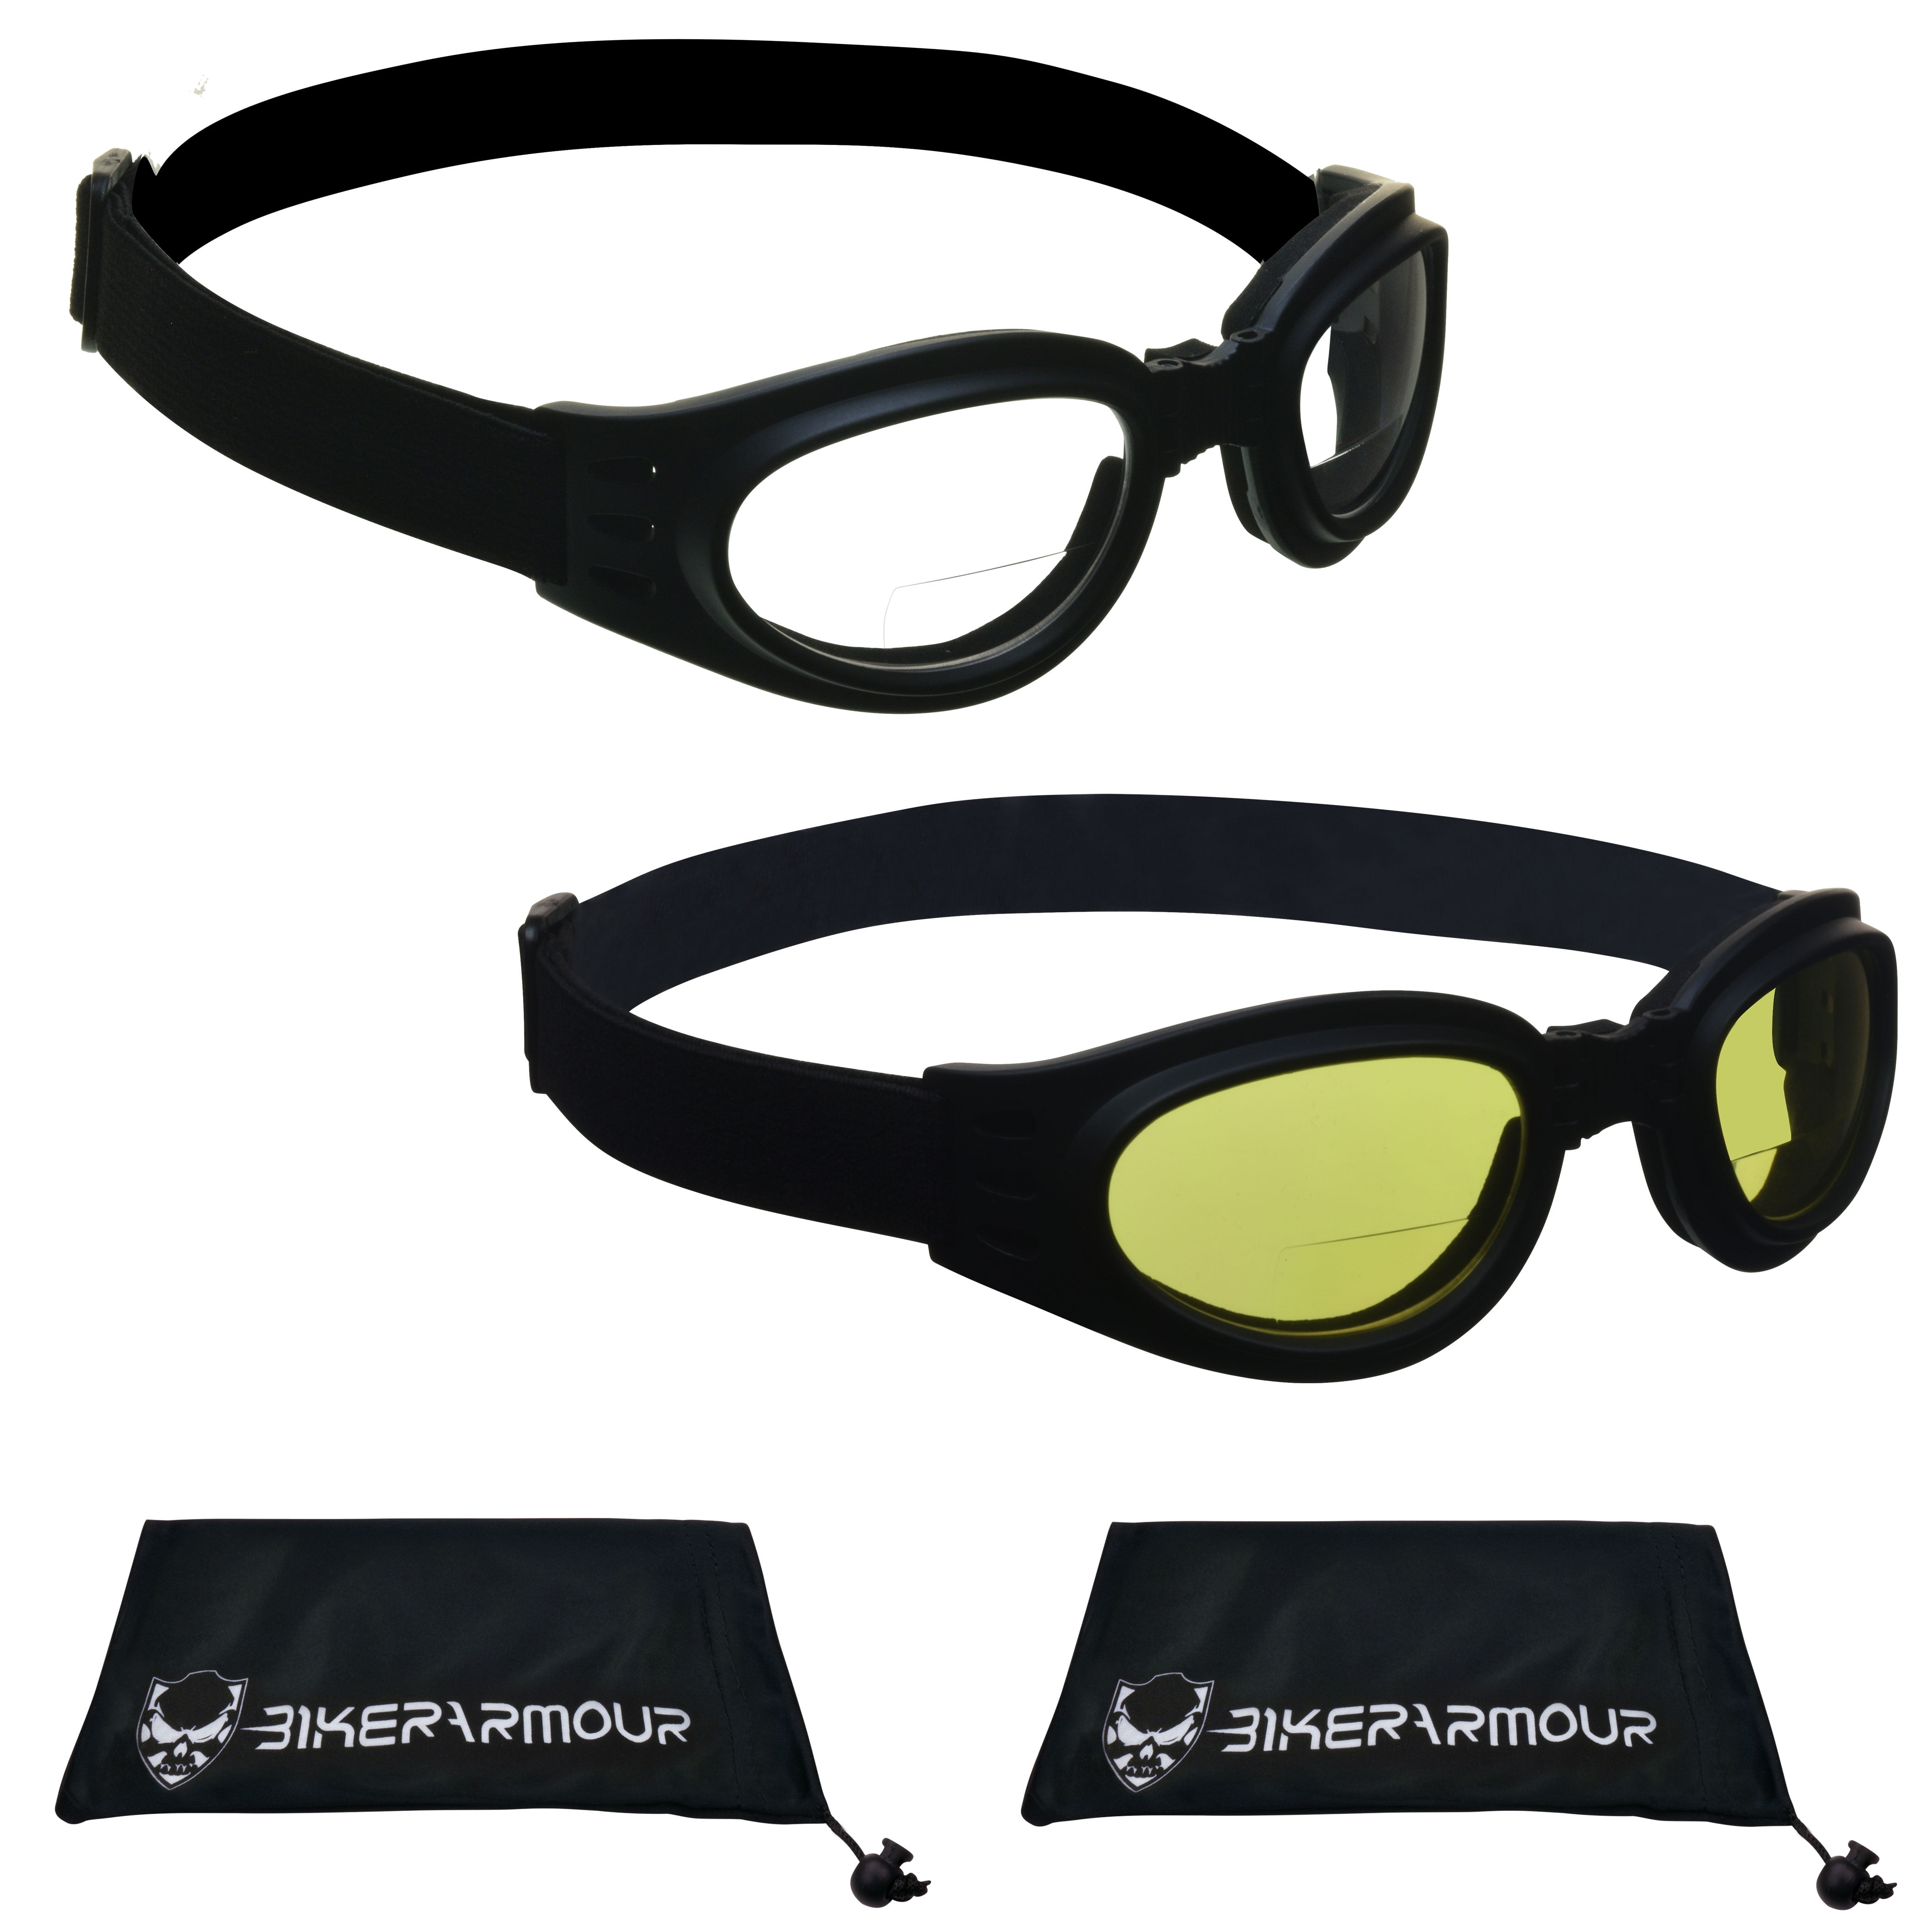 Airfoil Goggle Glasses Clear Lens Motorcycle skiing ATV 